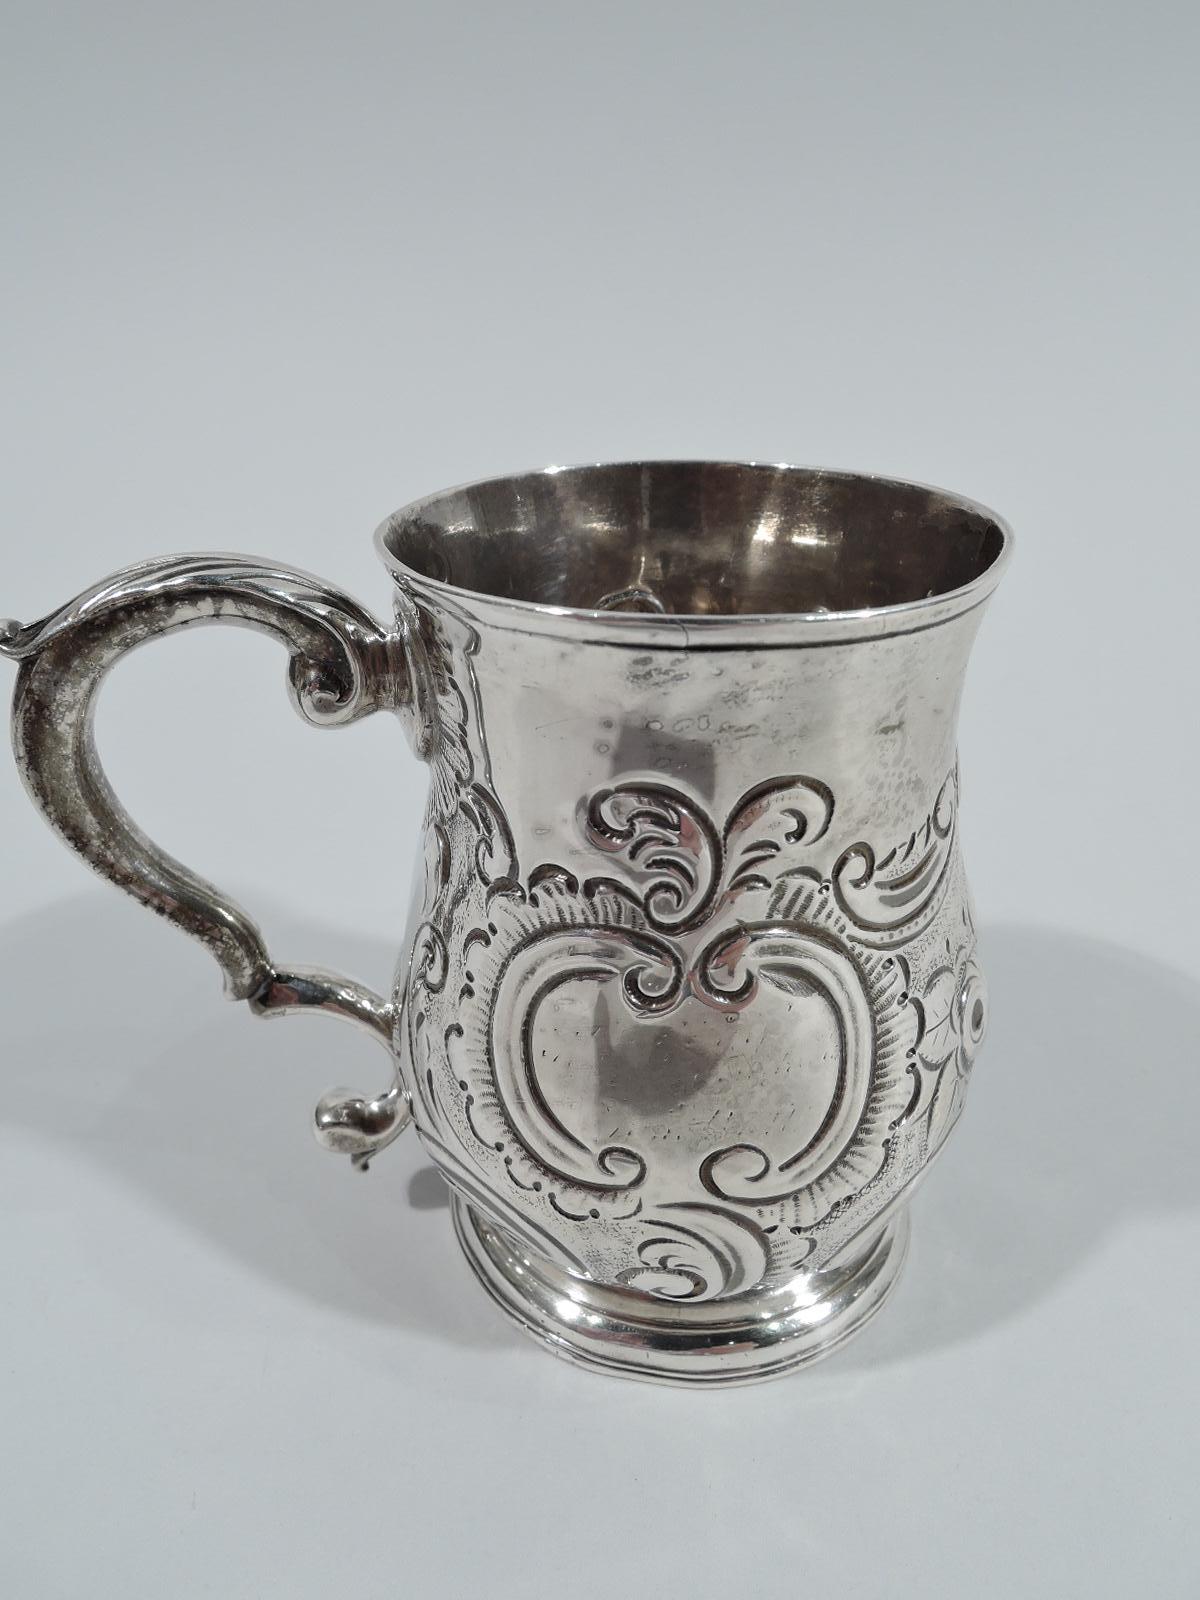 English Georgian sterling silver baby cup, 1760. Baluster bowl with leaf-capped double-scroll handle and raised foot. Chased and repousse flowers, leaves, and scrolls. Fully marked including London assay stamp and maker’s stamp TC. Weight: 4 troy